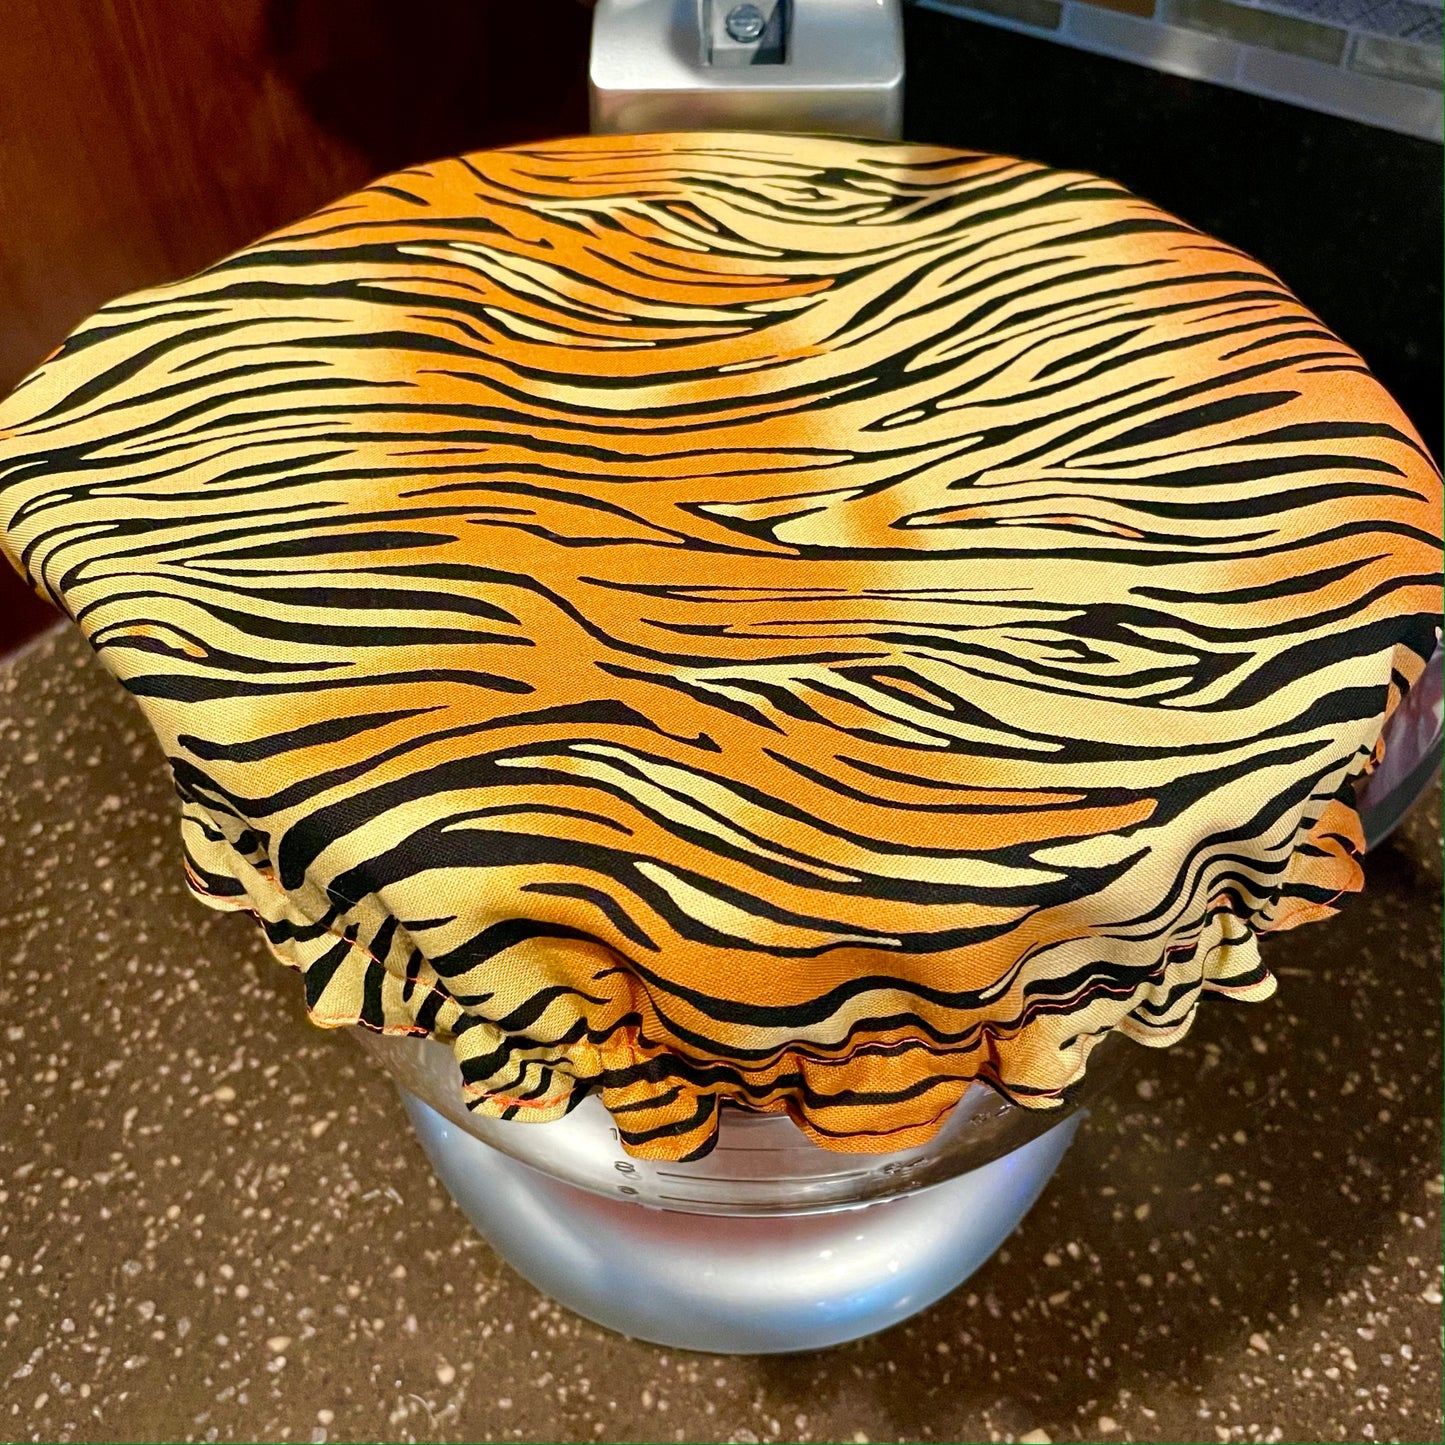 Stand Mixer Bowl Covers - Tiger Print